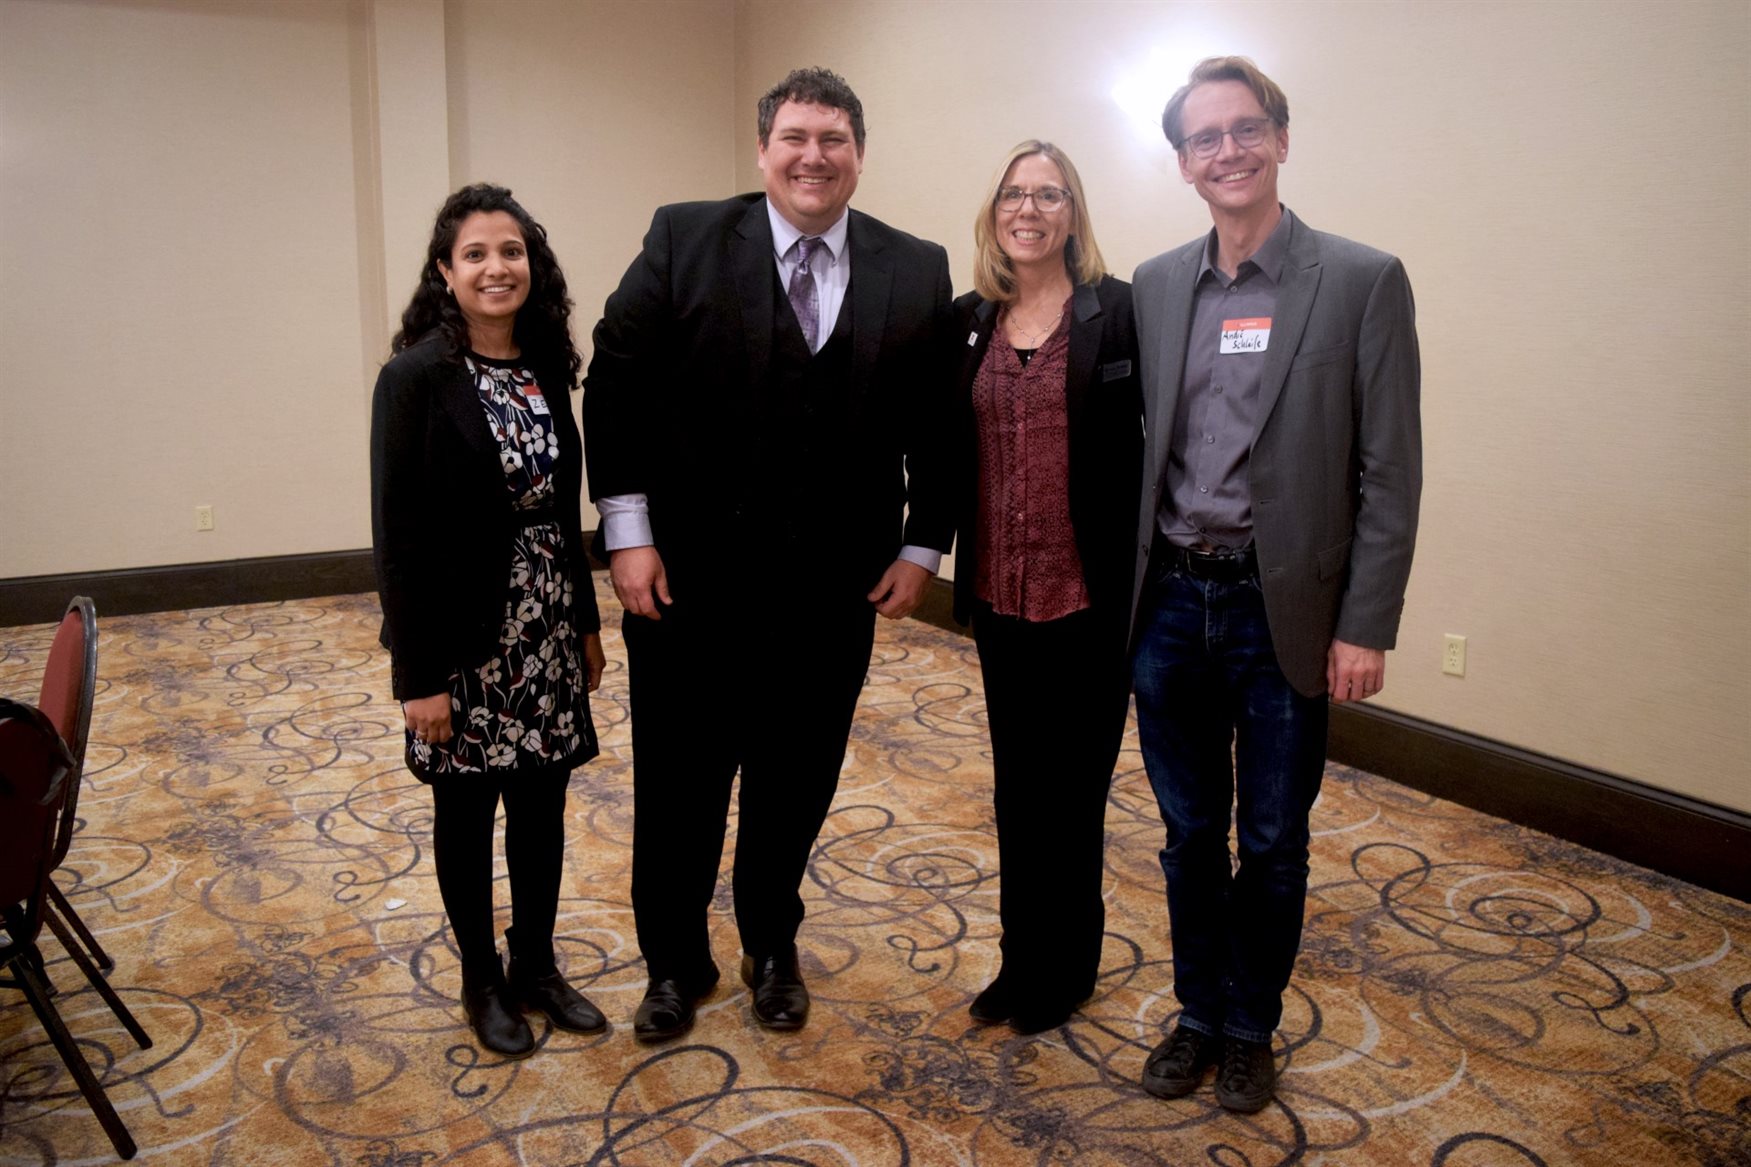 MatSE alumnus Ryan Haggerty, second from left, is all smiles after receiving the Young Alumni Award at the Holiday Inn in Champaign, Ill. on April 21. Posed with him are Zeba Parker, left, a MatSE alumna; Nancy Sottos, third from left, MatSE's department head, Swanlund Endowed Chair and Center for Advanced Study Professor; and Andr&amp;amp;amp;amp;amp;amp;amp;amp;amp;amp;eacute; Schliefe, MatSE associate professor.